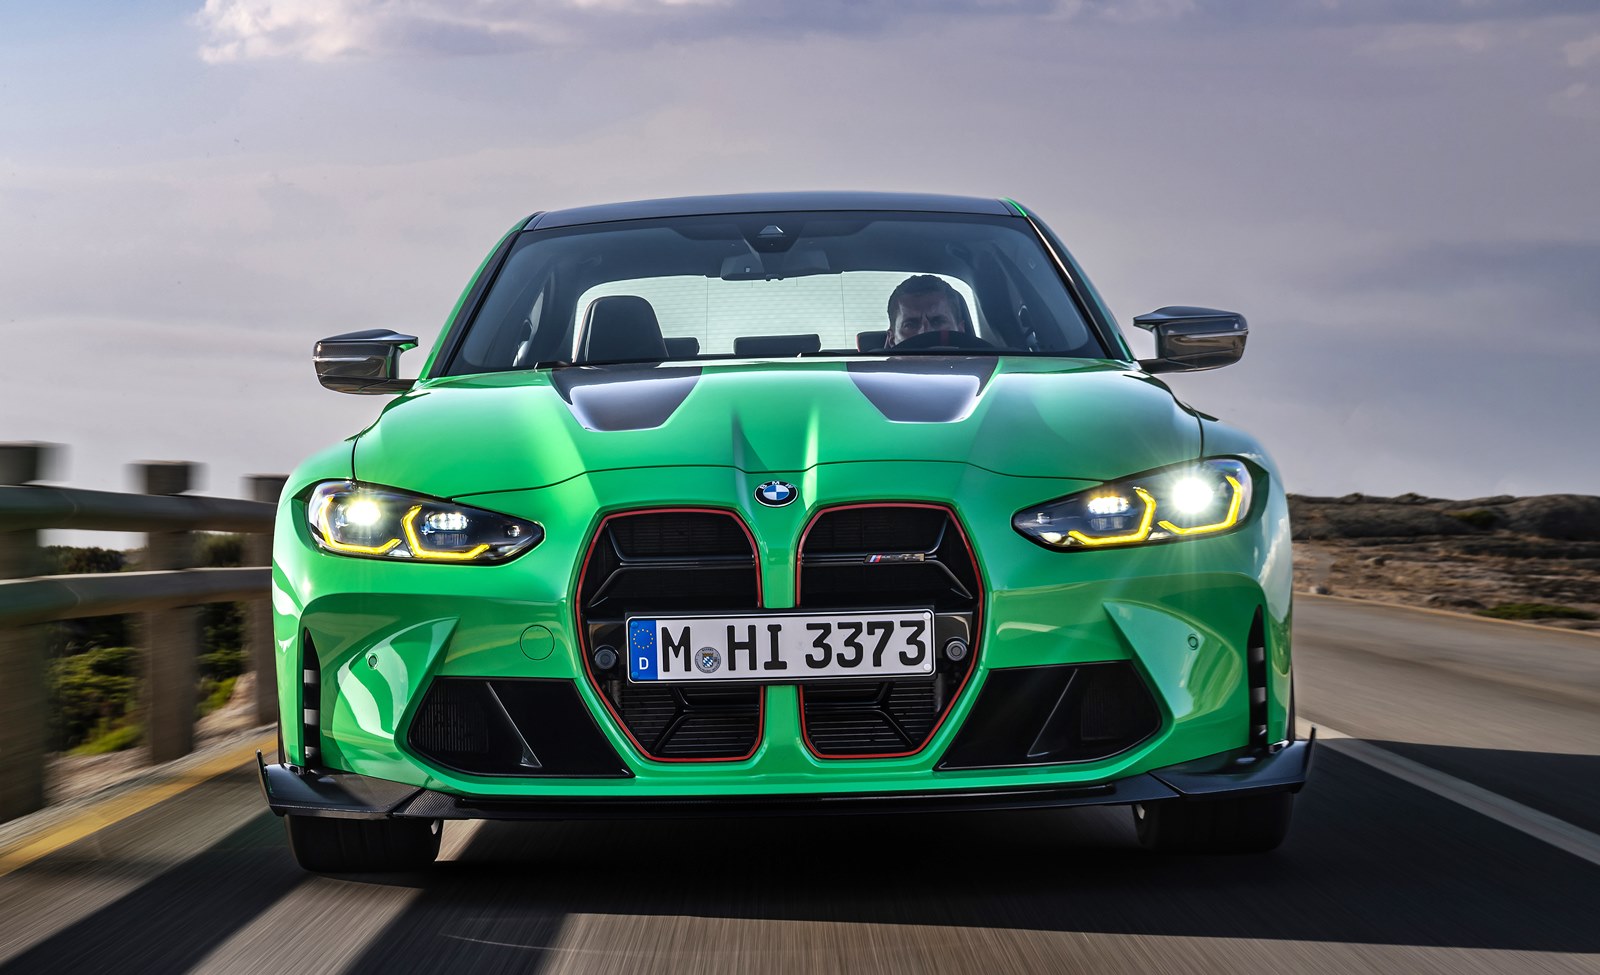 BMW iM3 trademark could preview all-electric M3 super saloon